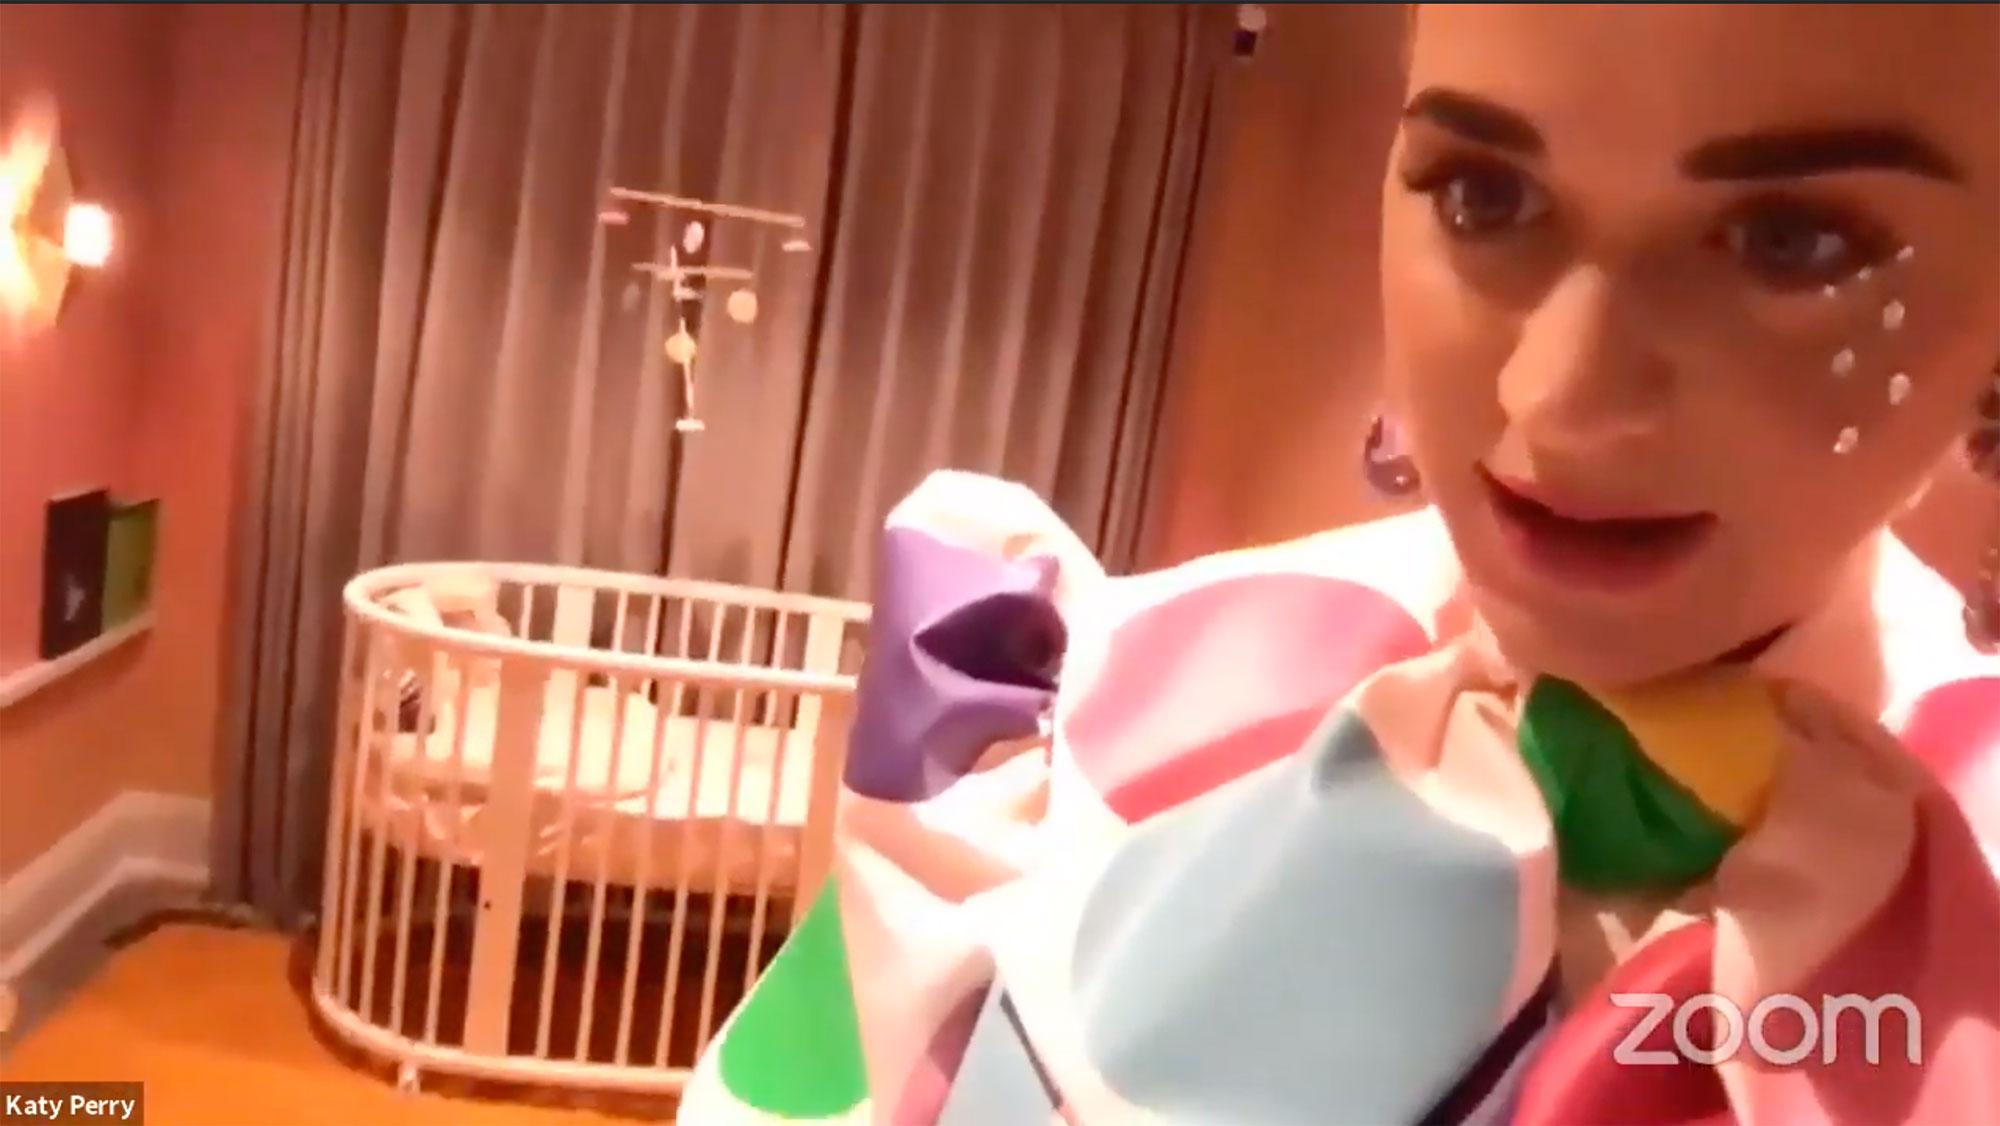 The singer also shared a first look at the baby's crib